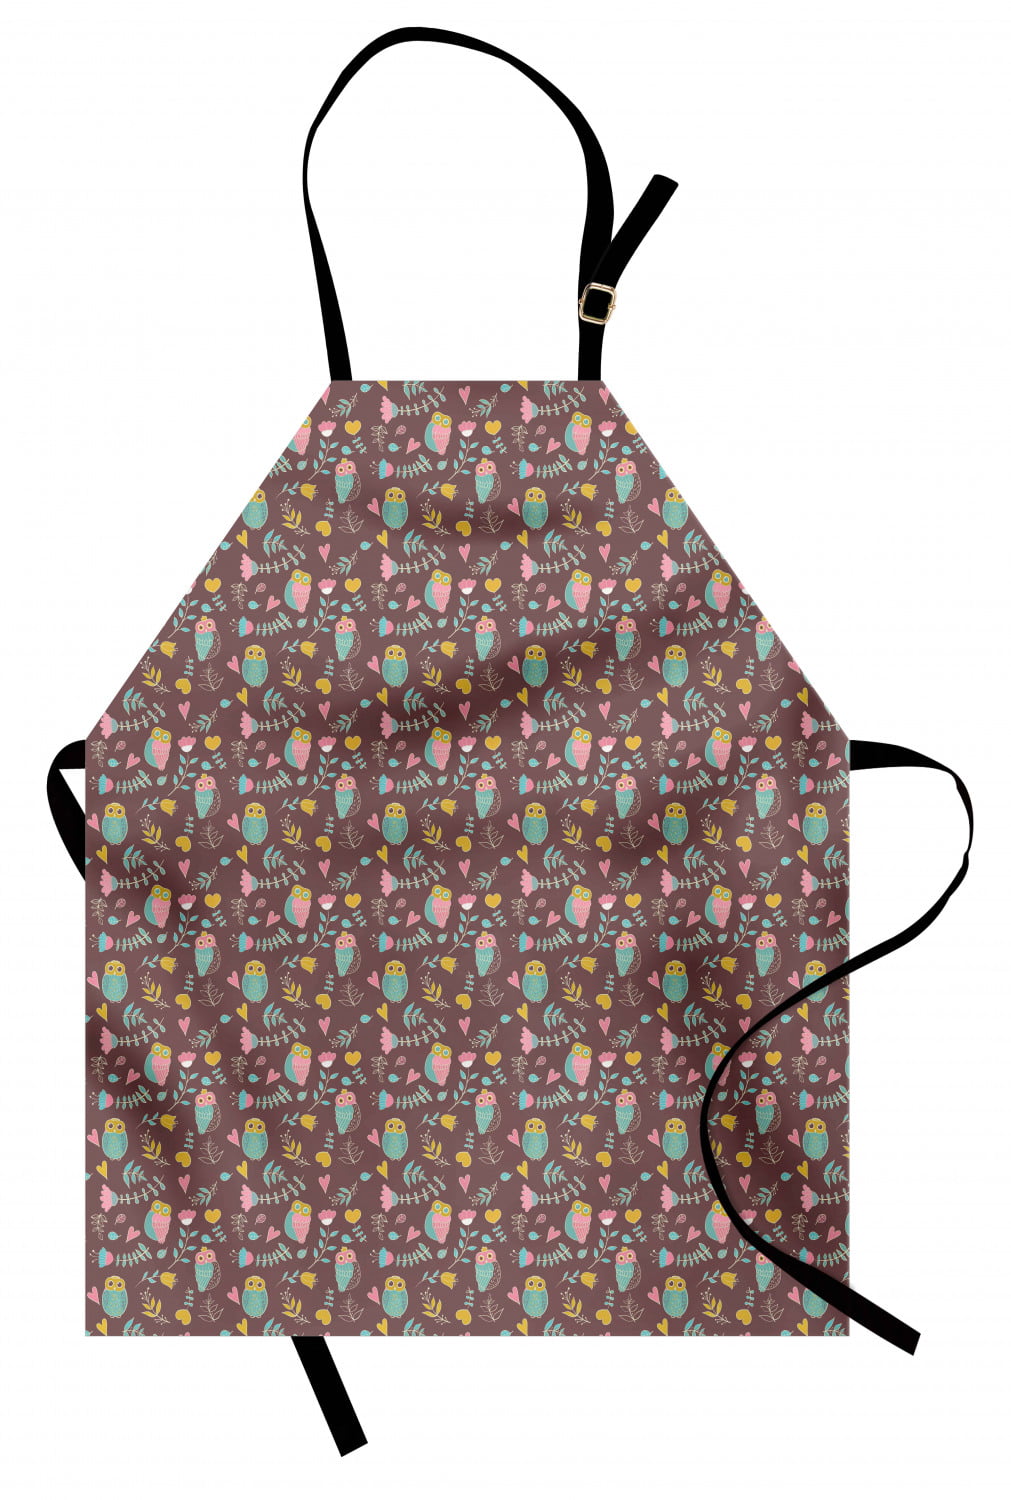 Details about   Apron Bib Adjustable Strap for Gardening Cooking Unisex Standard Size Ambesonne 